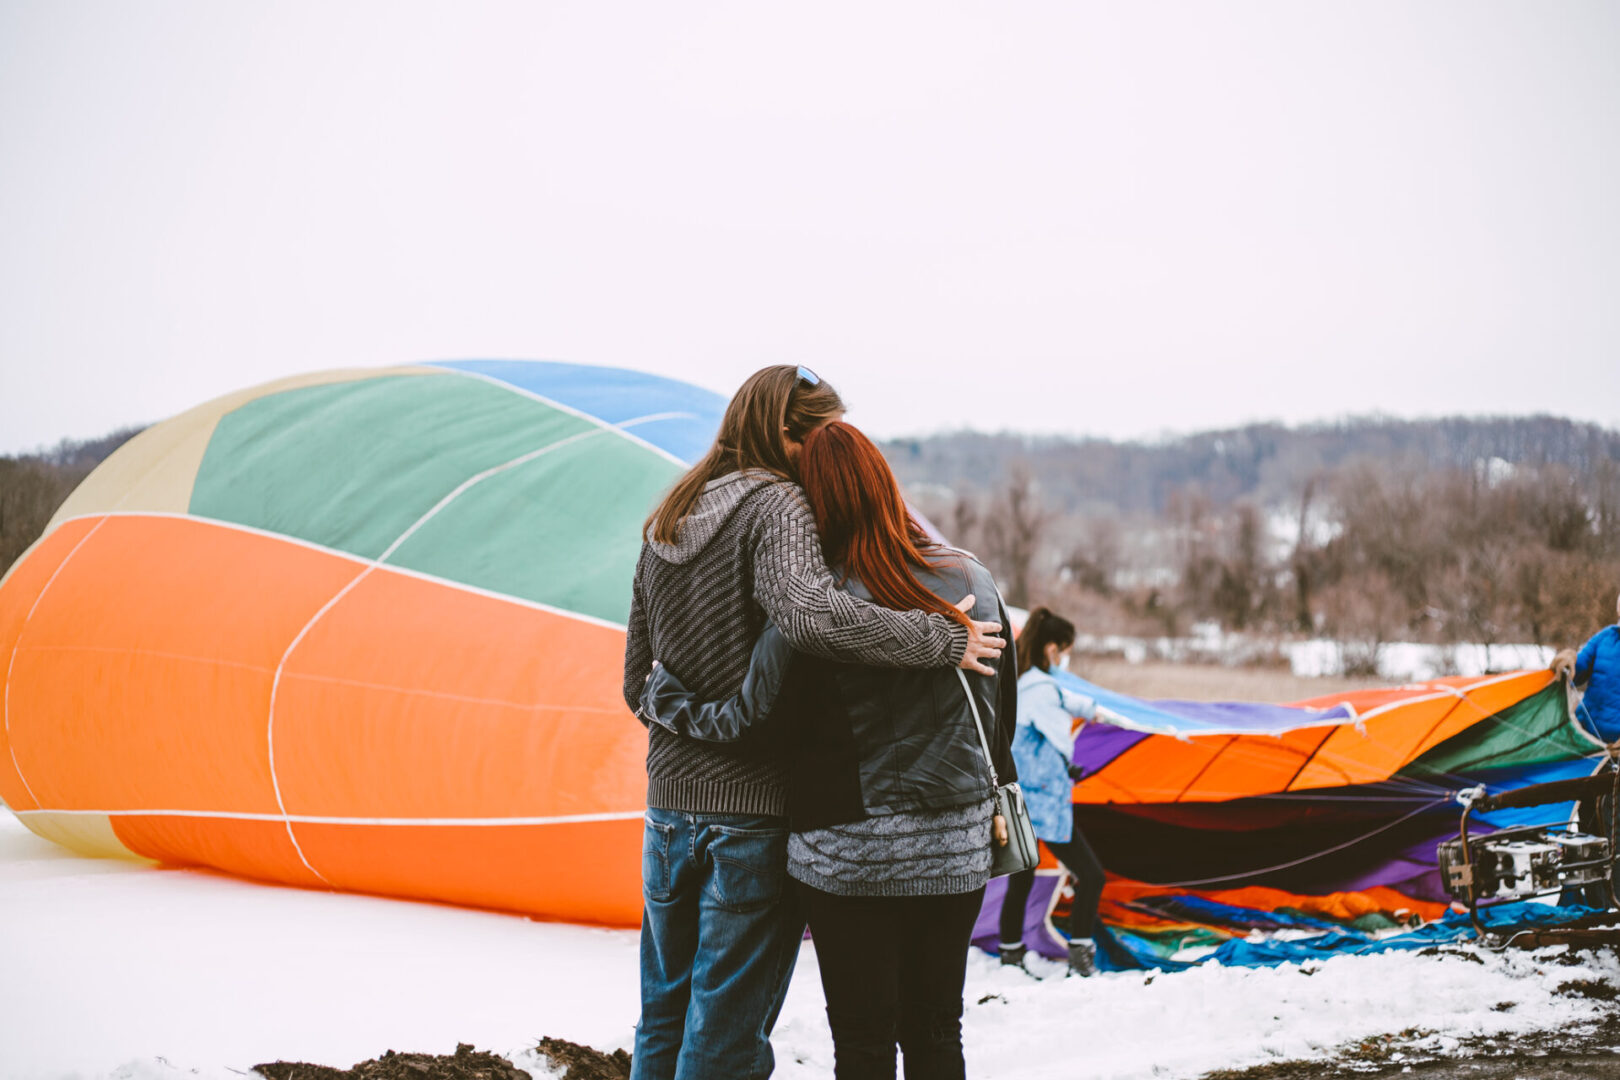 Two people hug in front of a hot air balloon.